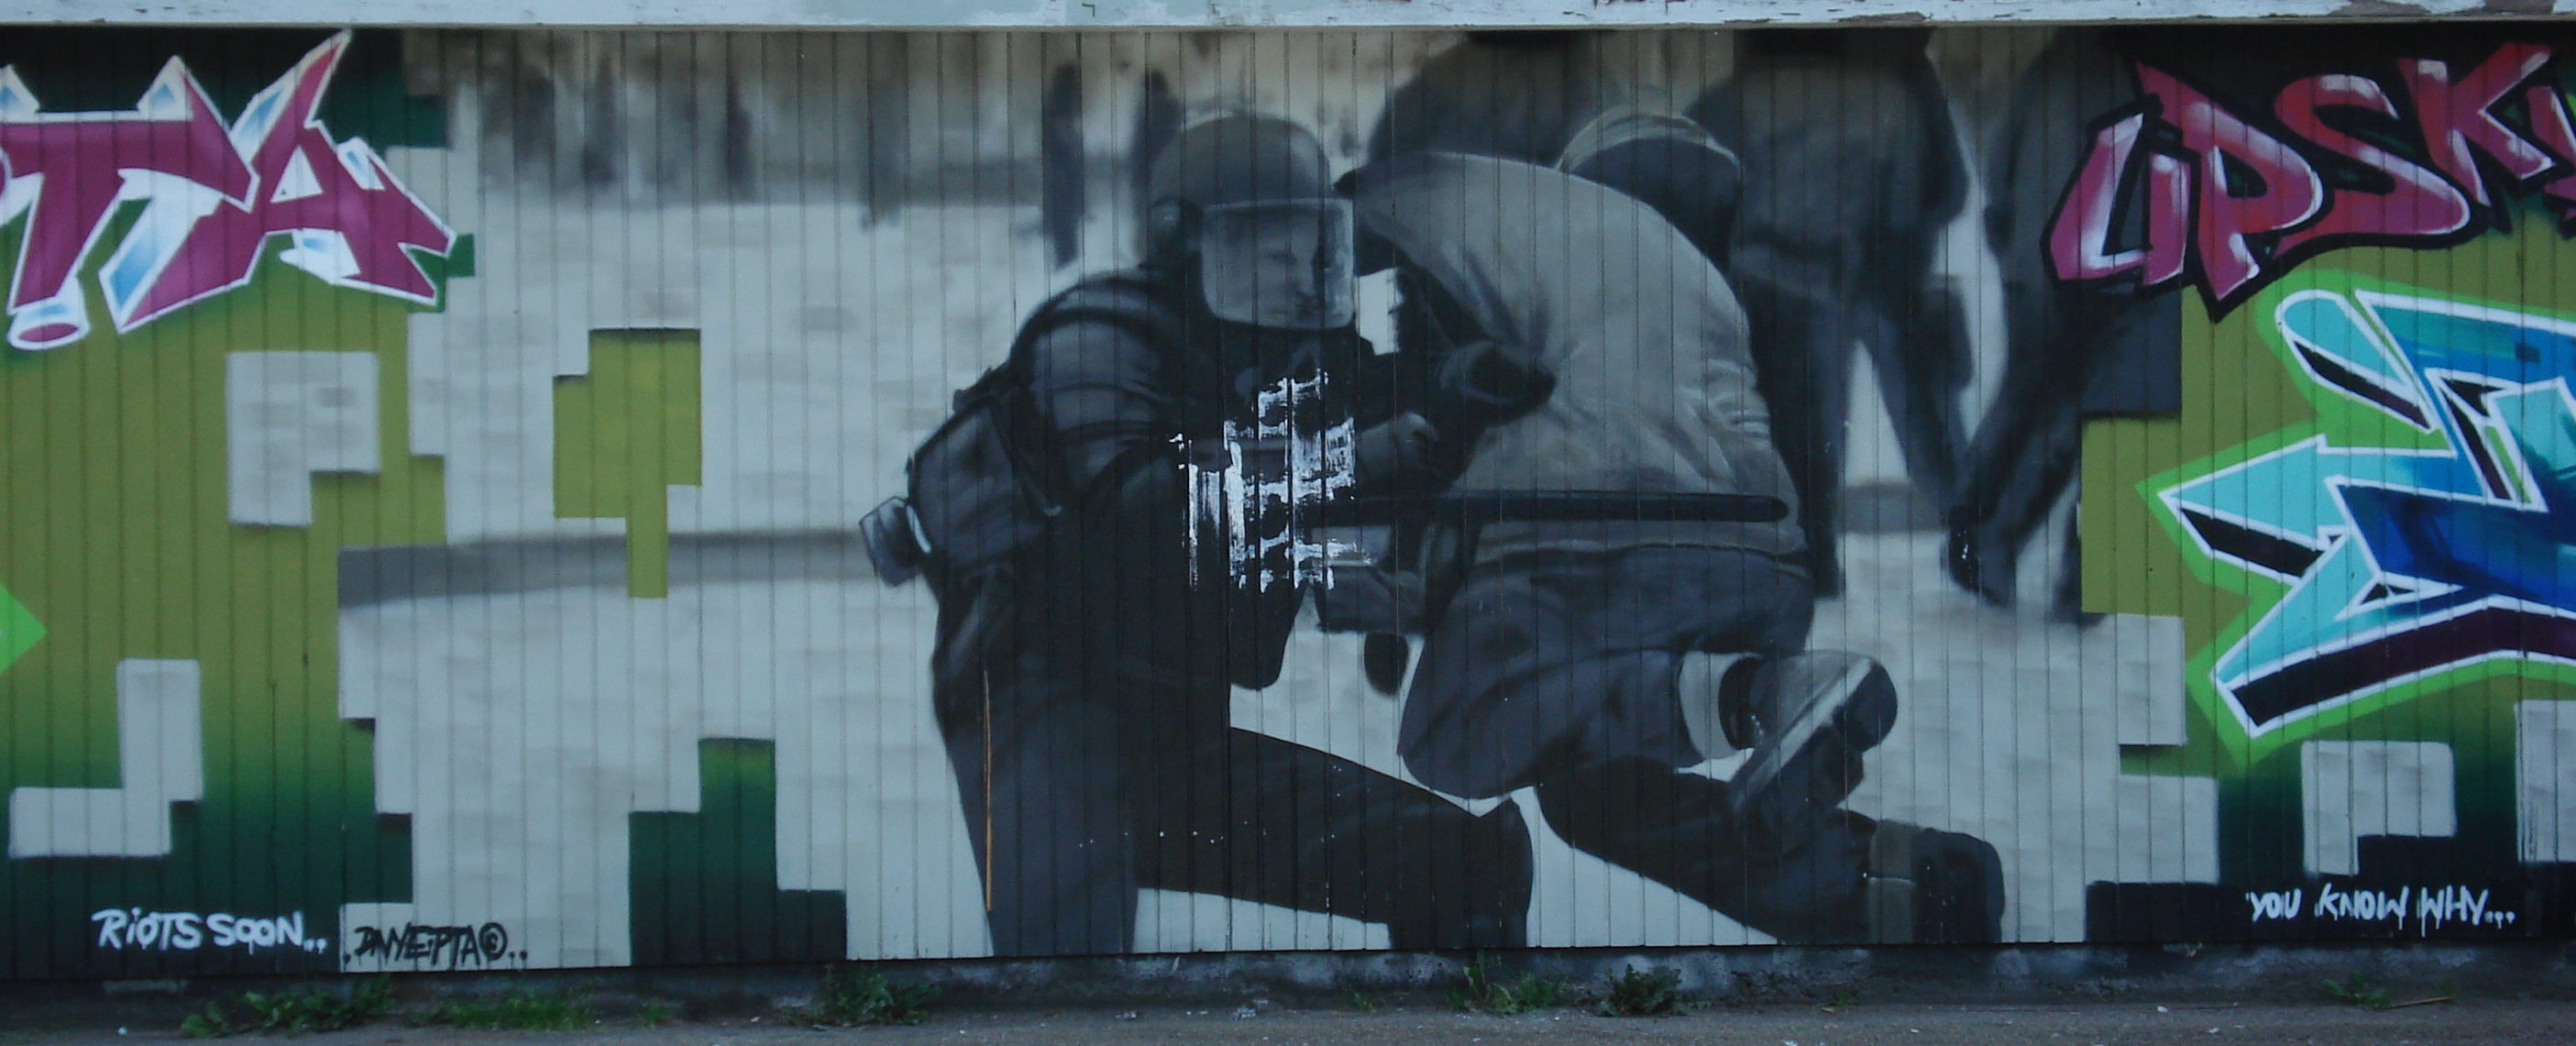 a mural of a couple dancing against a green background